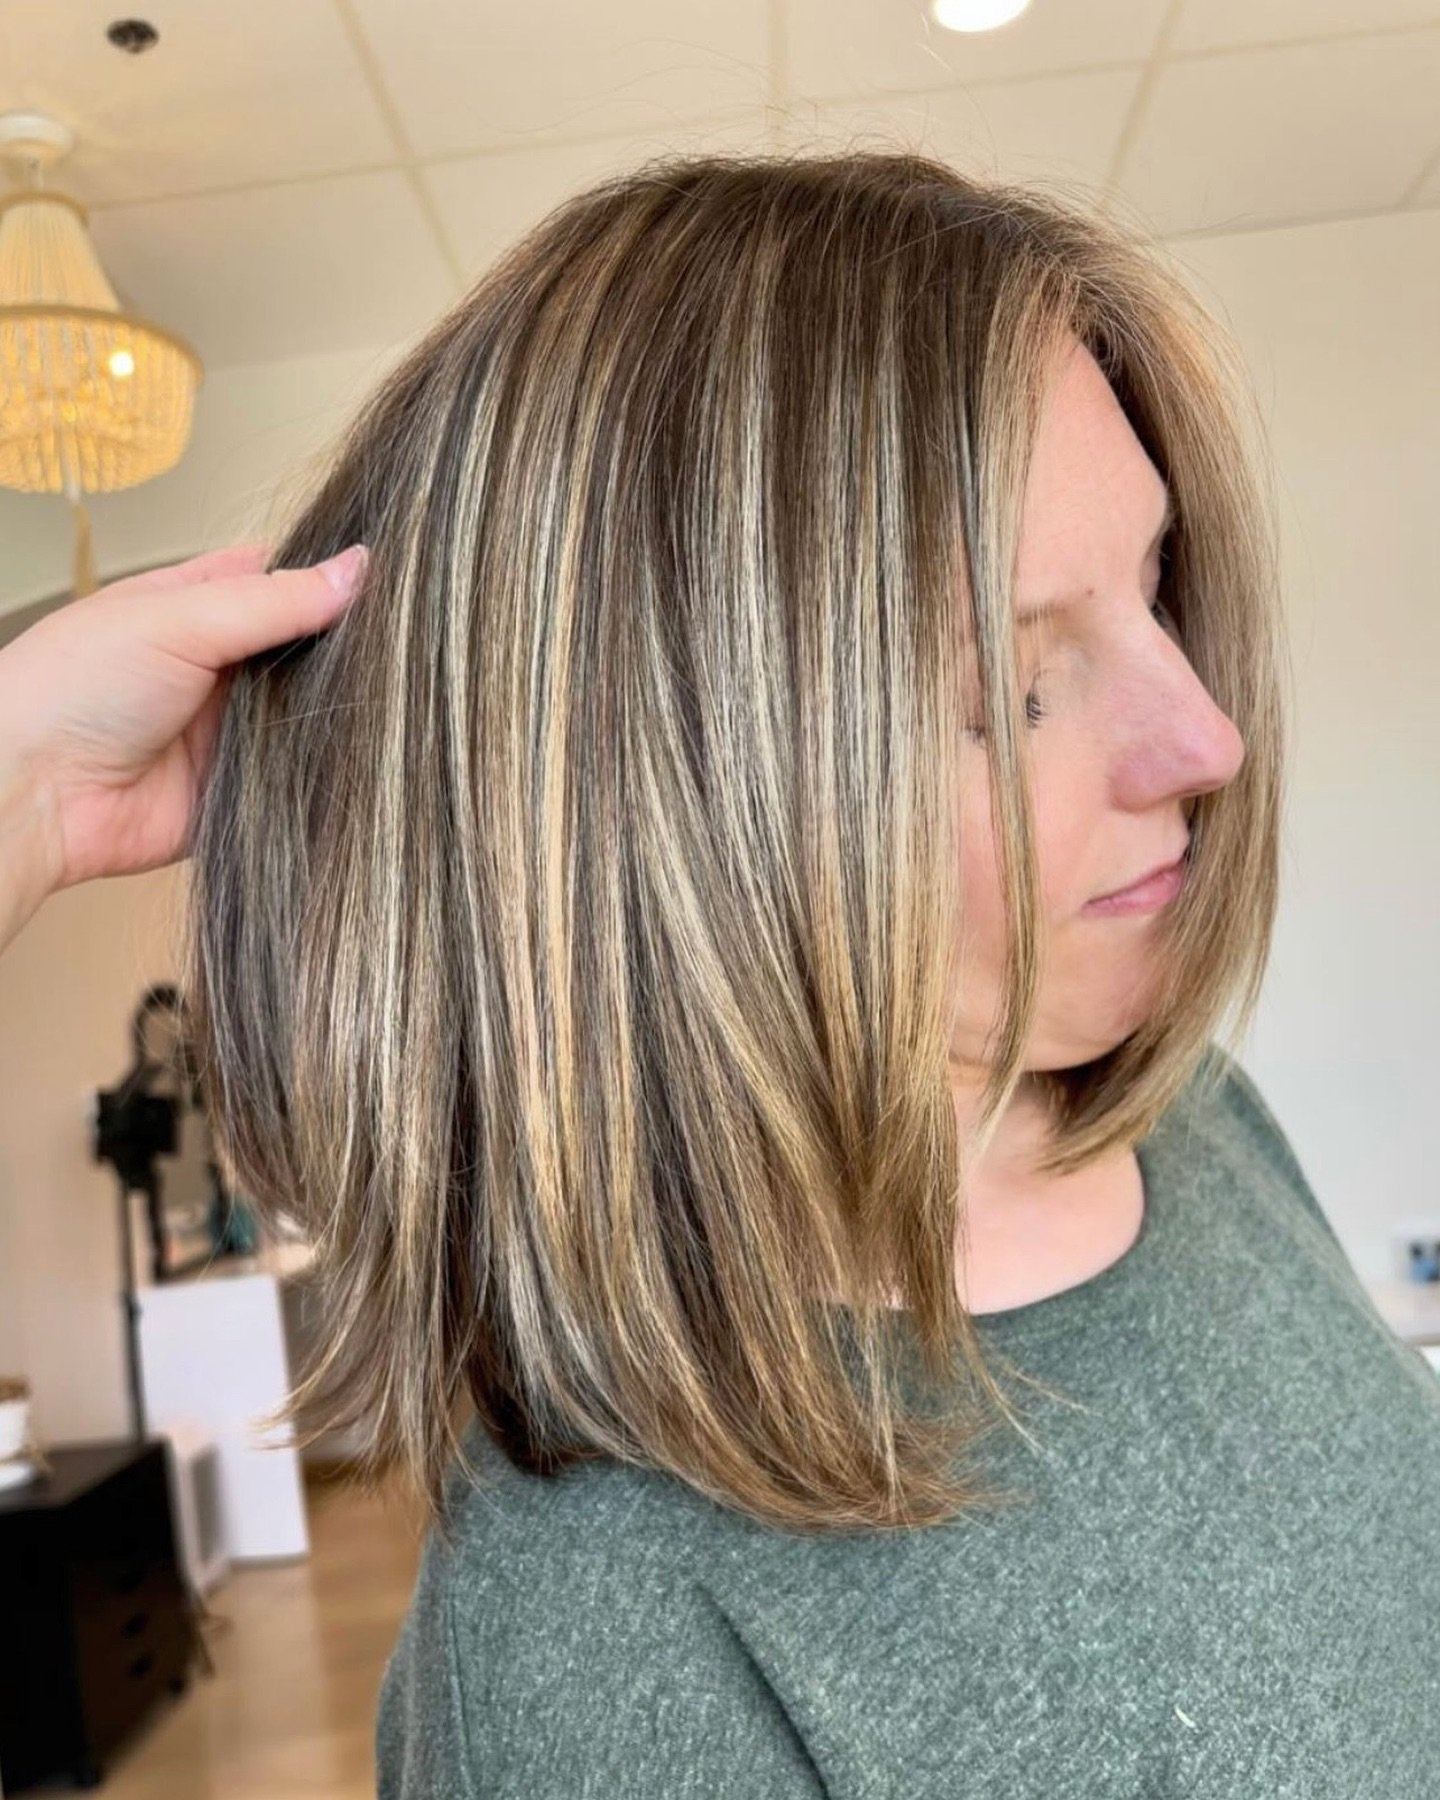 Spring is a reminder on how beautiful change can be 🦋🌷☀️

Hair by Chantel

To make an appointment, give us a call at 517.225.5958 or book online at district308.com/book

.
.
.
.
.
Howell, Brighton, Pinckney, Hartland, Fowlerville, Michigan, lived-i